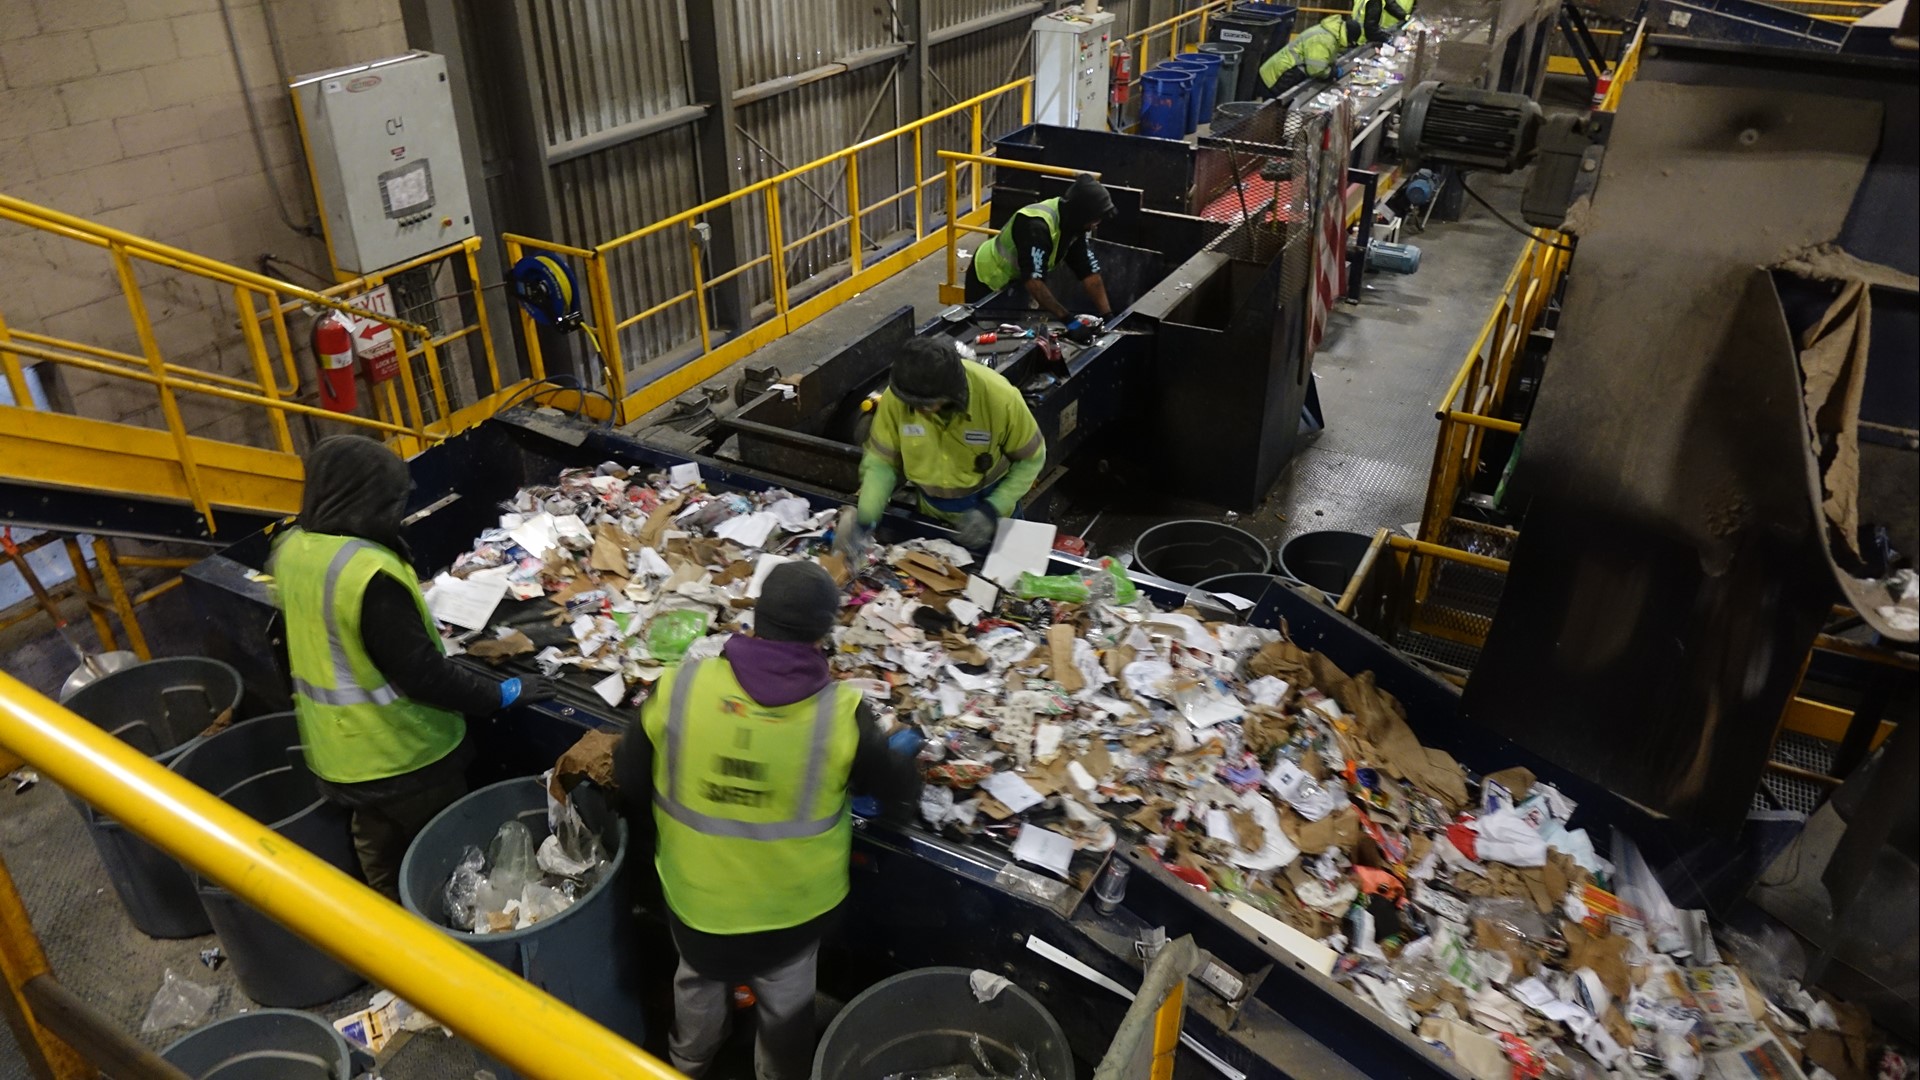 Viewers asked NEWS CENTER Maine to verify if those materials actually get recycled.